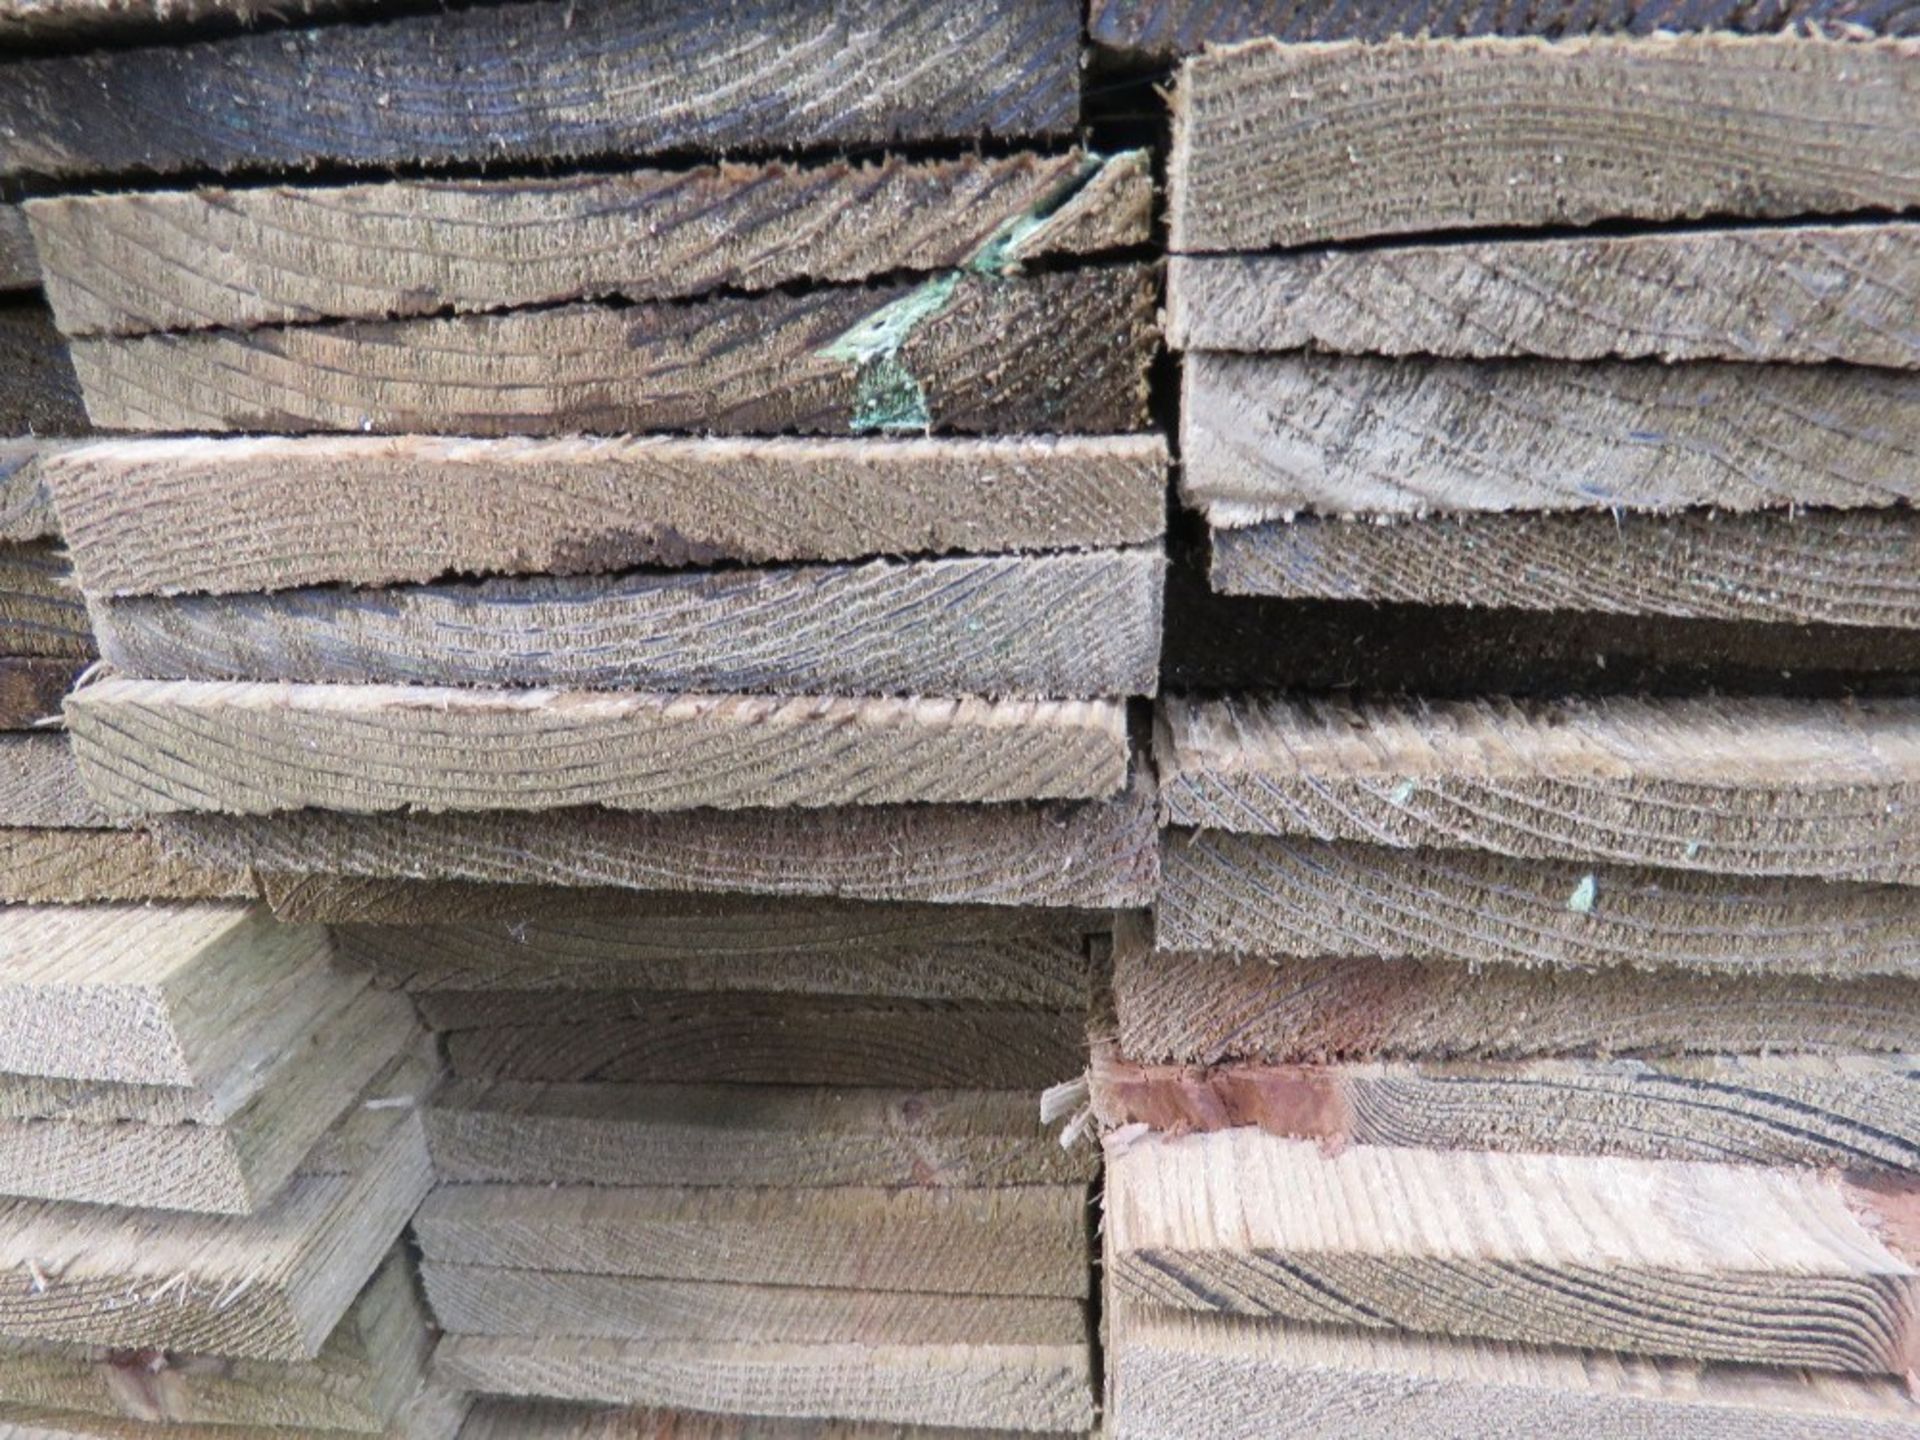 LARGE PACK OF TREATED FEATHER EDGE FENCE CLADDING TIMBER BOARDS. 1.65M LENGTH X 100MM WIDTH APPROX. - Image 3 of 3